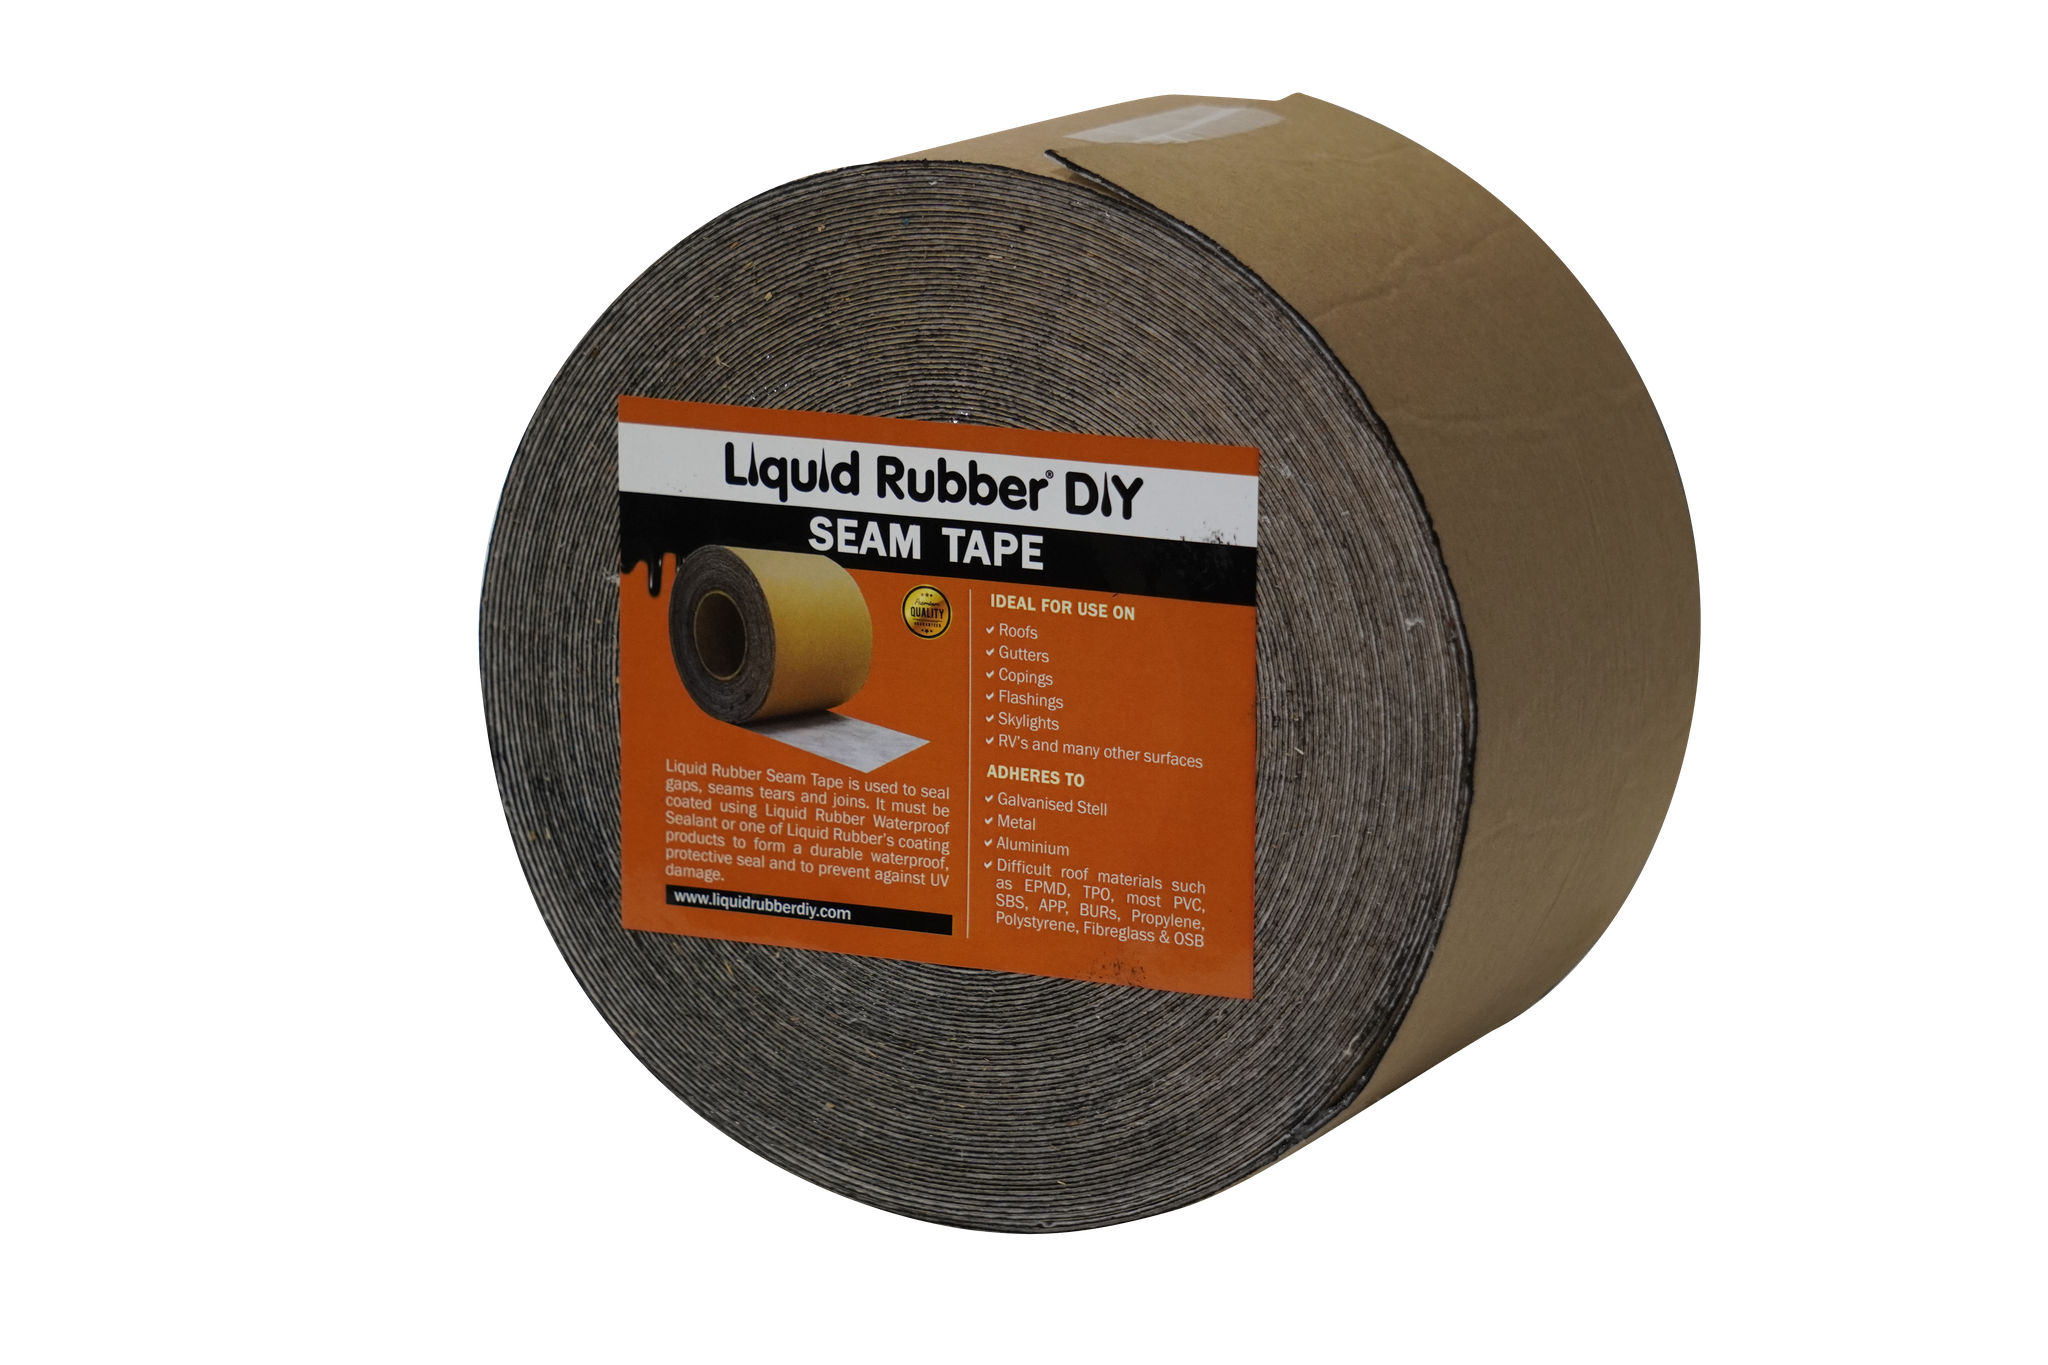 A roll of Seam Tape used for sealing and waterproofing cracks, vents, joints, seams on roofs, box gutters and other projects.